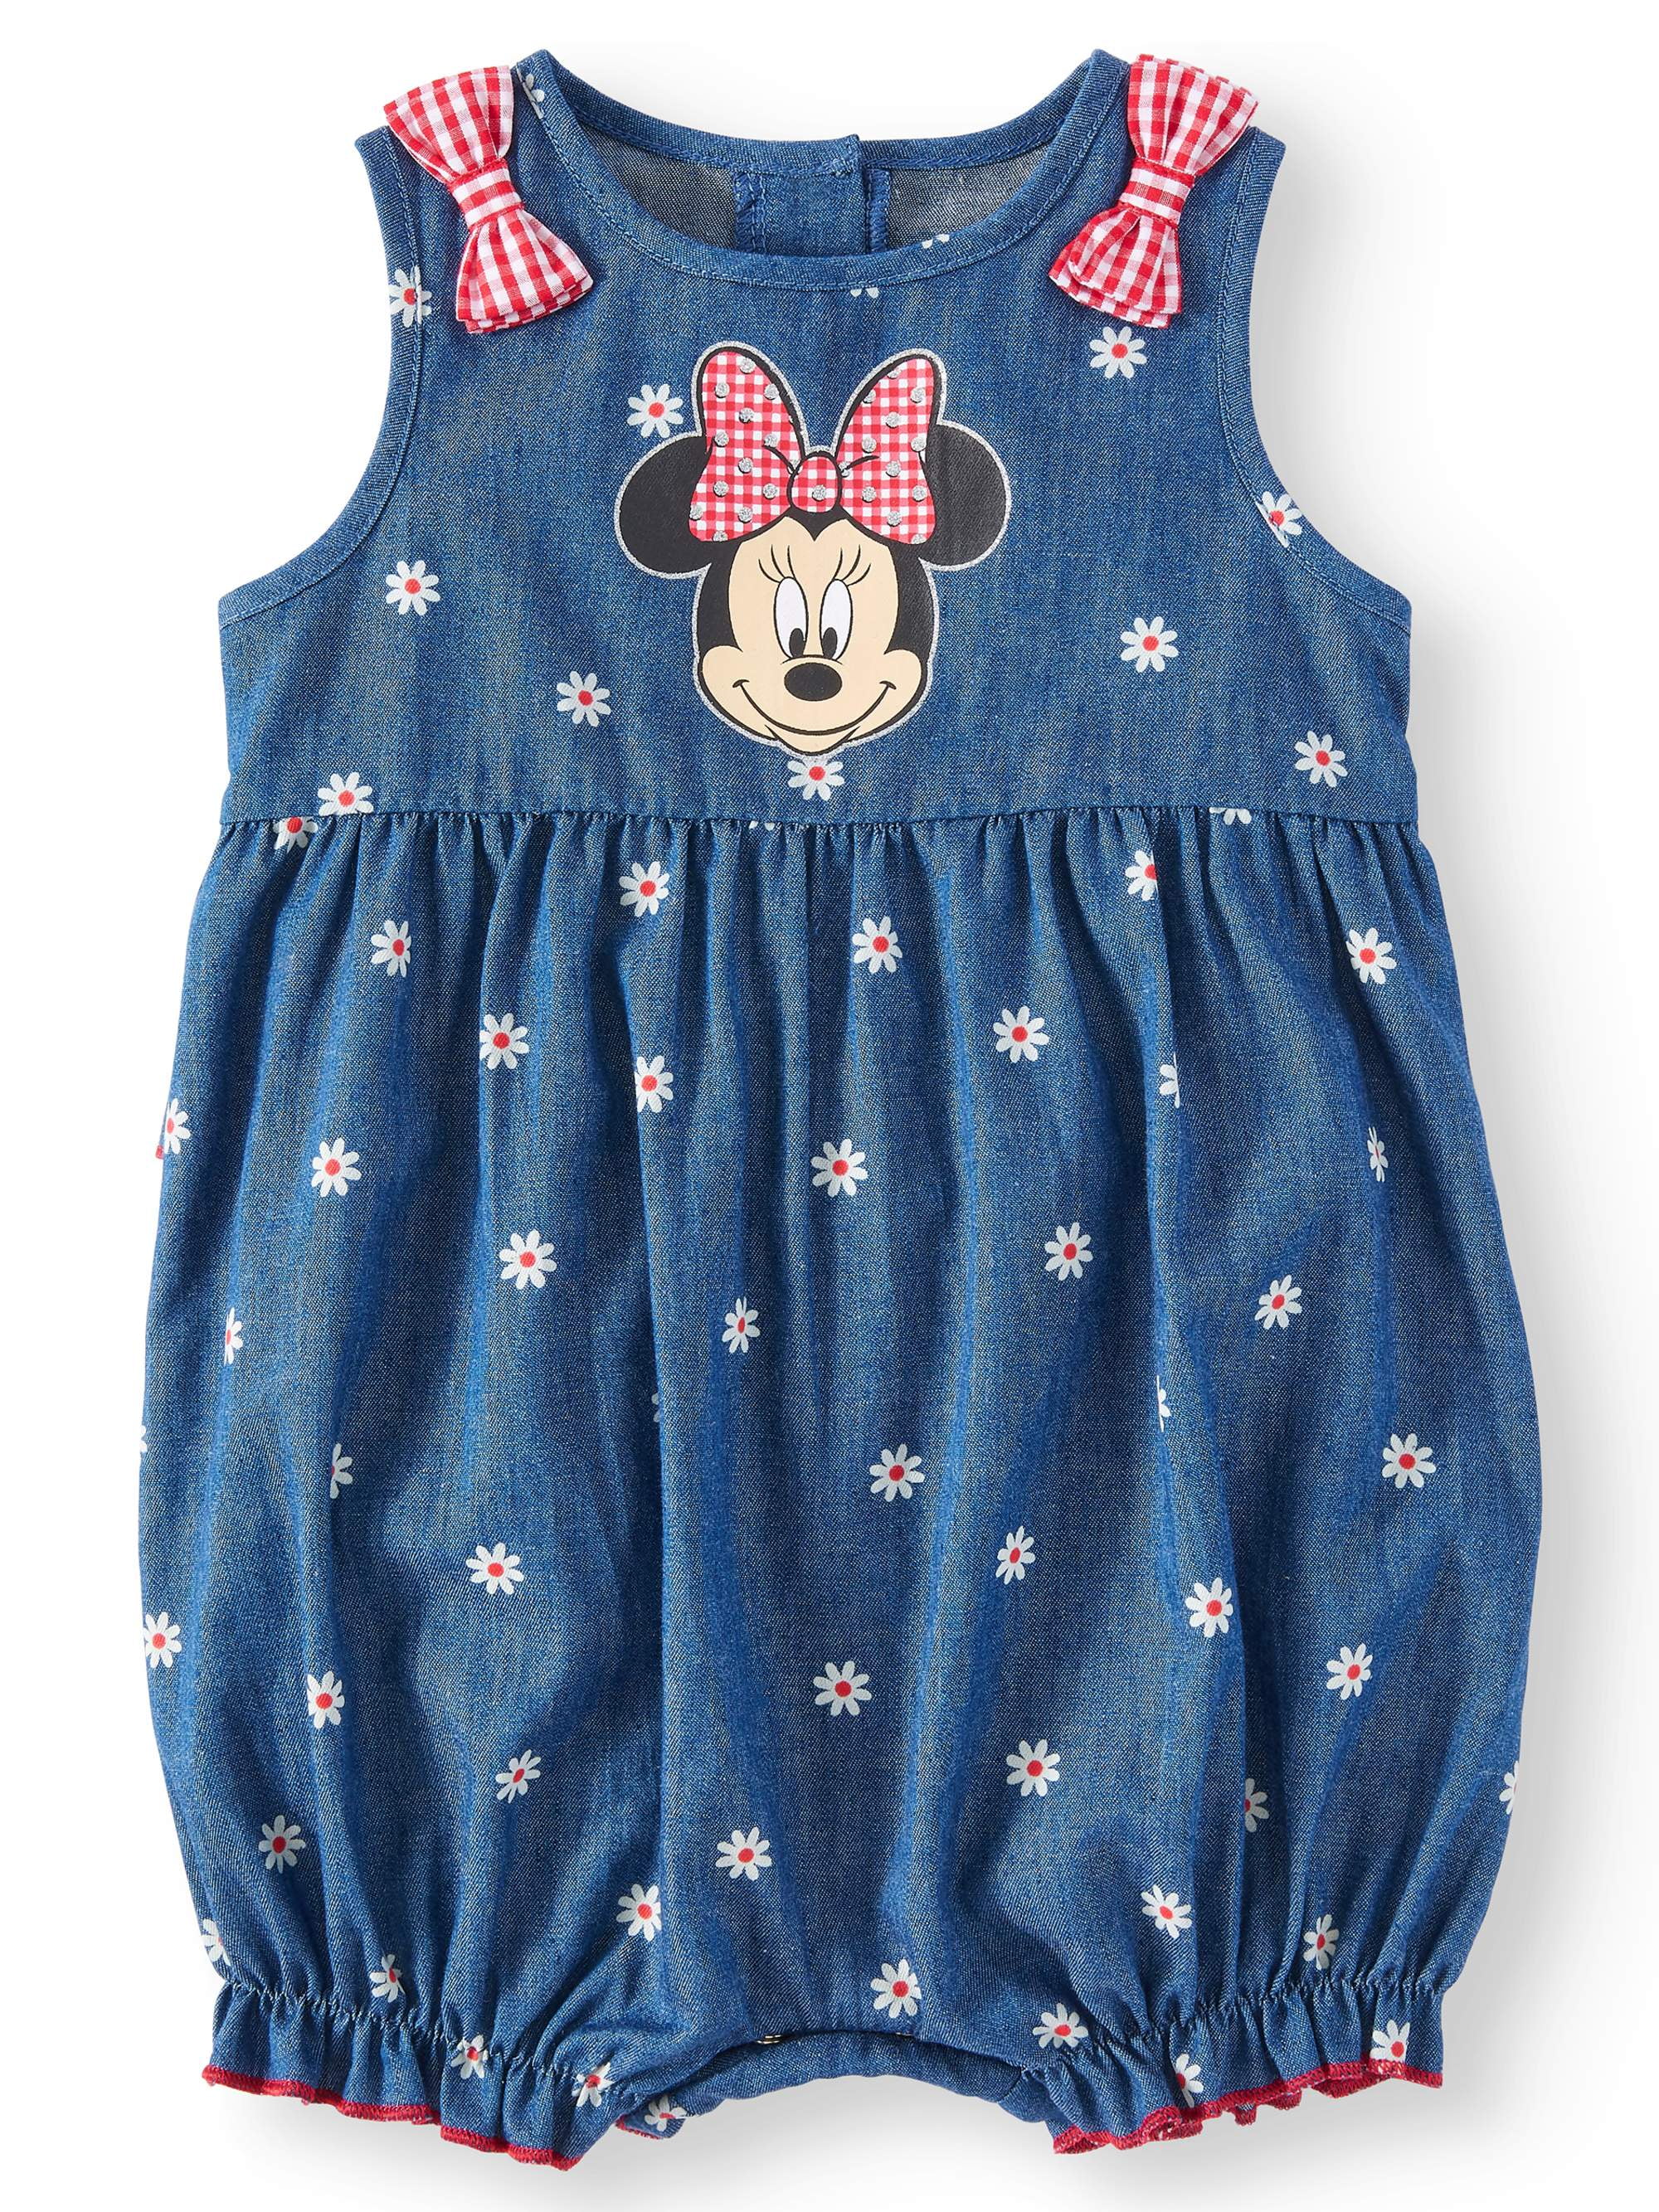 Buy > minnie mouse baby girl dress > in stock